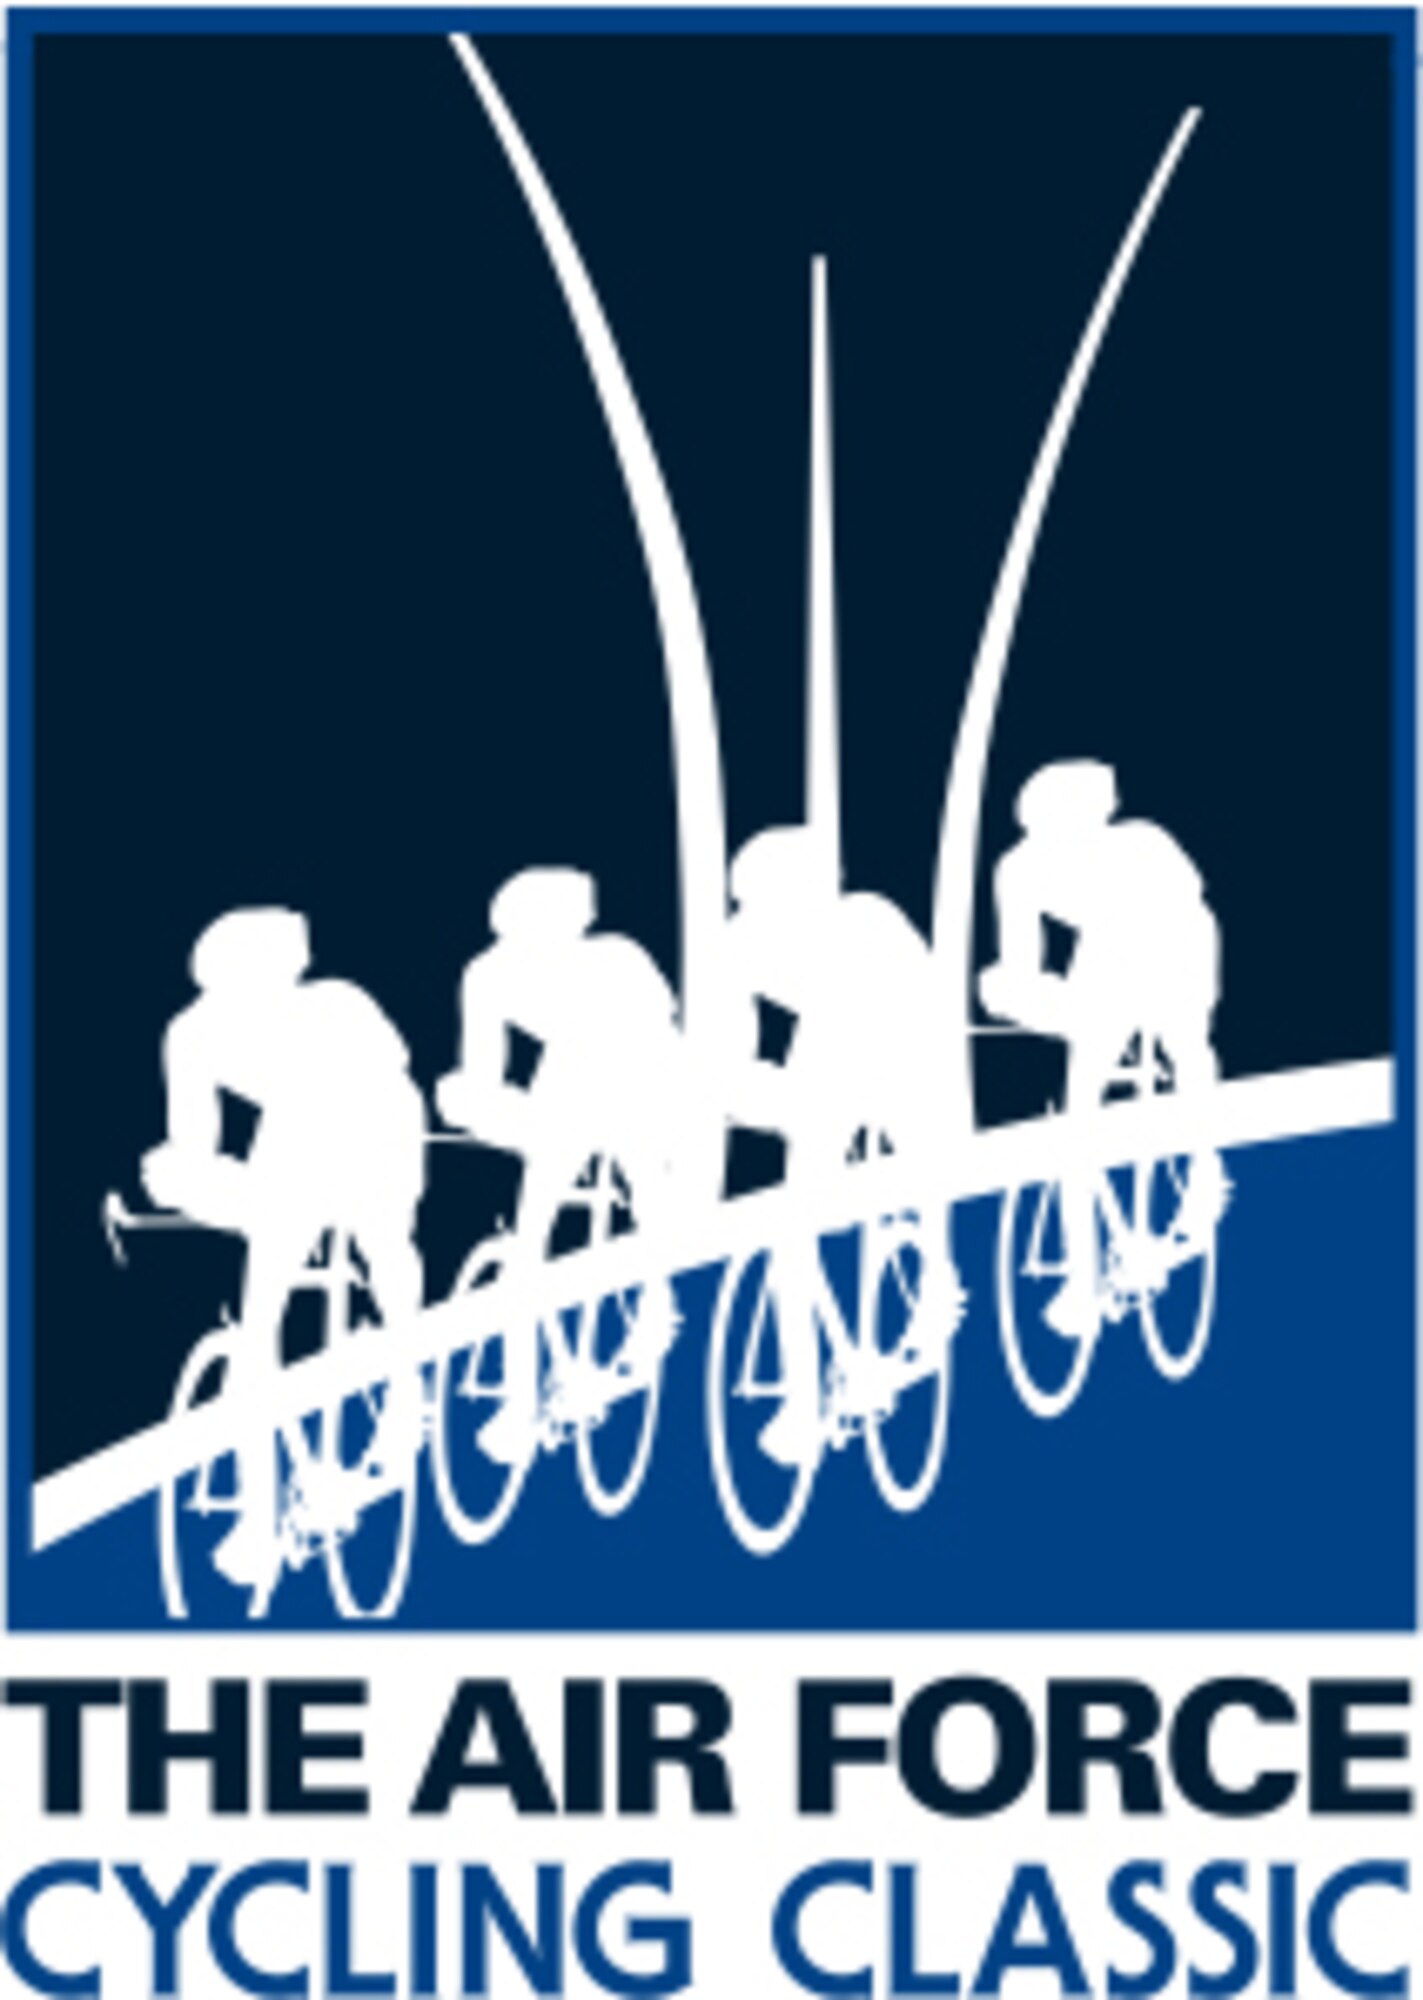 The 2009 U.S. Air Force Cycling Classic will take place May 30-31 in Arlington, Va. The USAF Cycling Classic offers cycling enthusiasts of all abilities the opportunity to participate in this National Capital Region event. 
